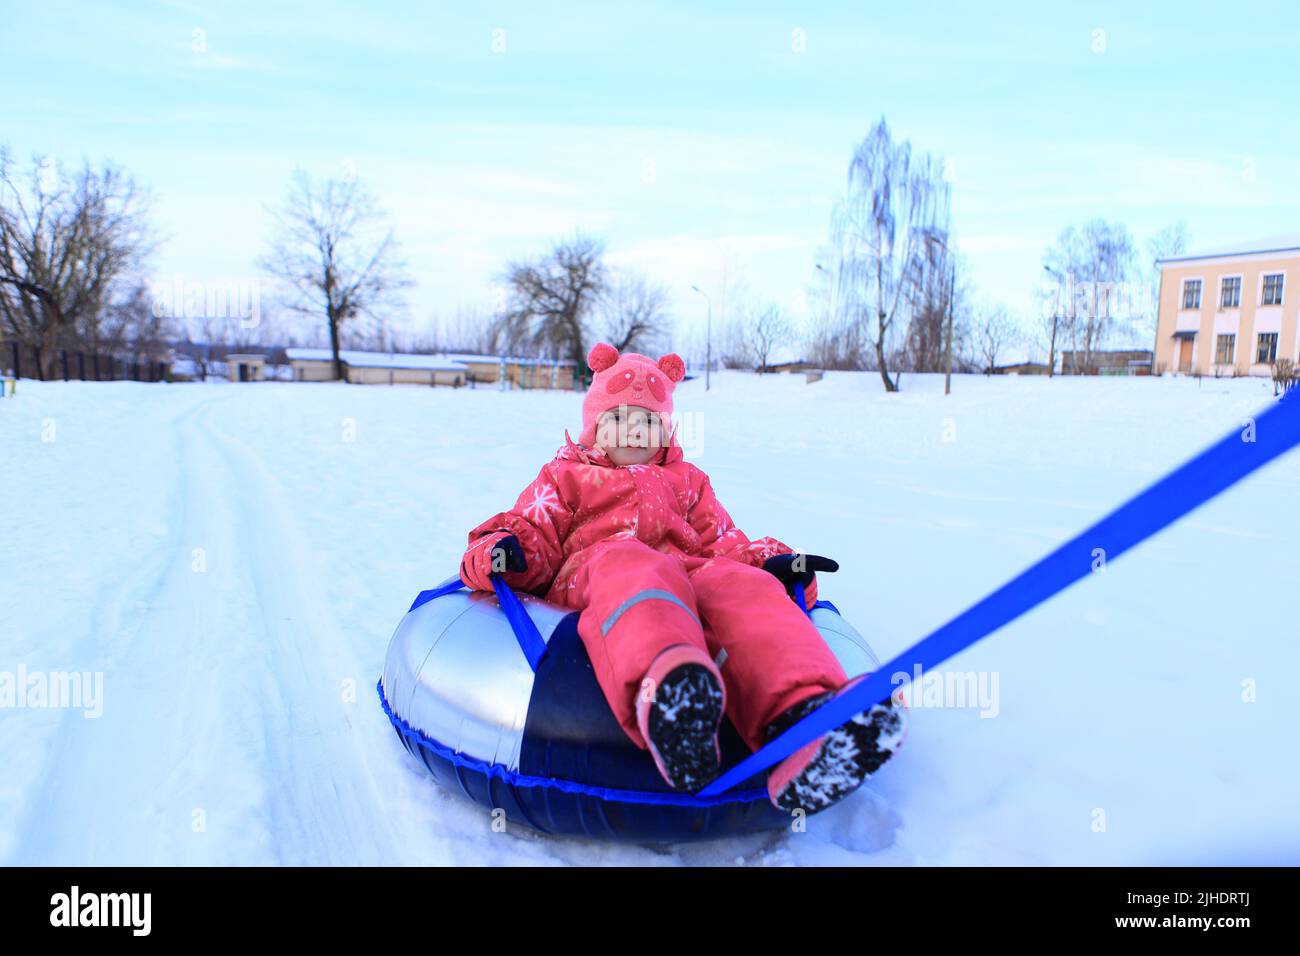 A girl in a winter overalls sits on a tubing. The child is sledding in the snow. Stock Photo